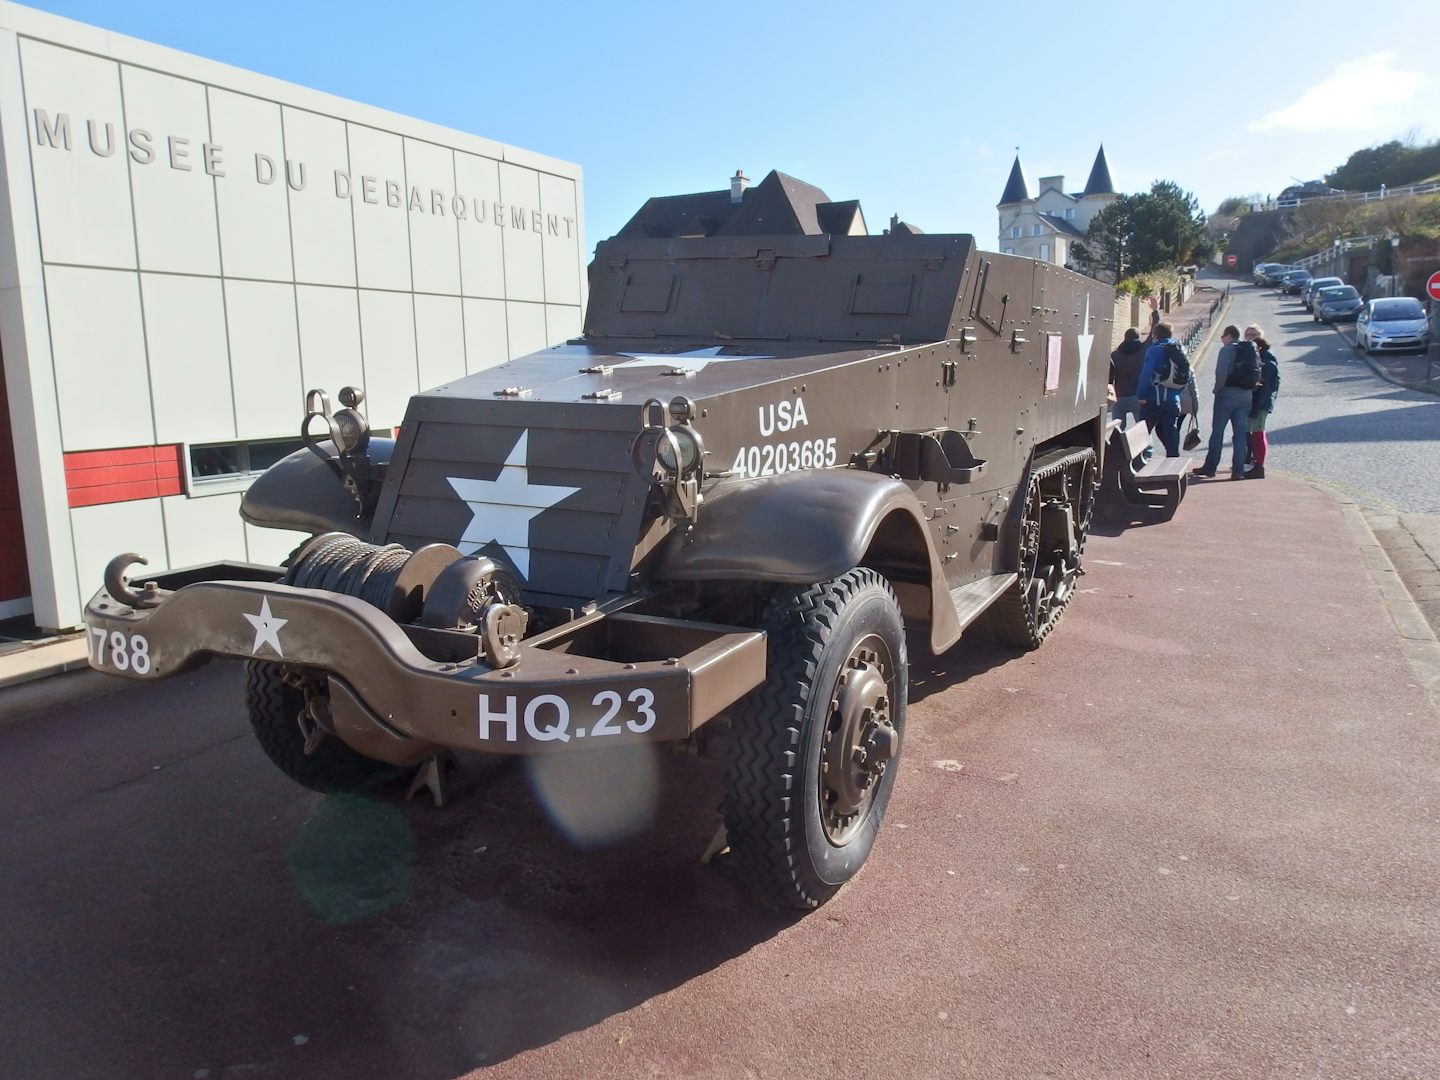 Front of the Museum at Normandy